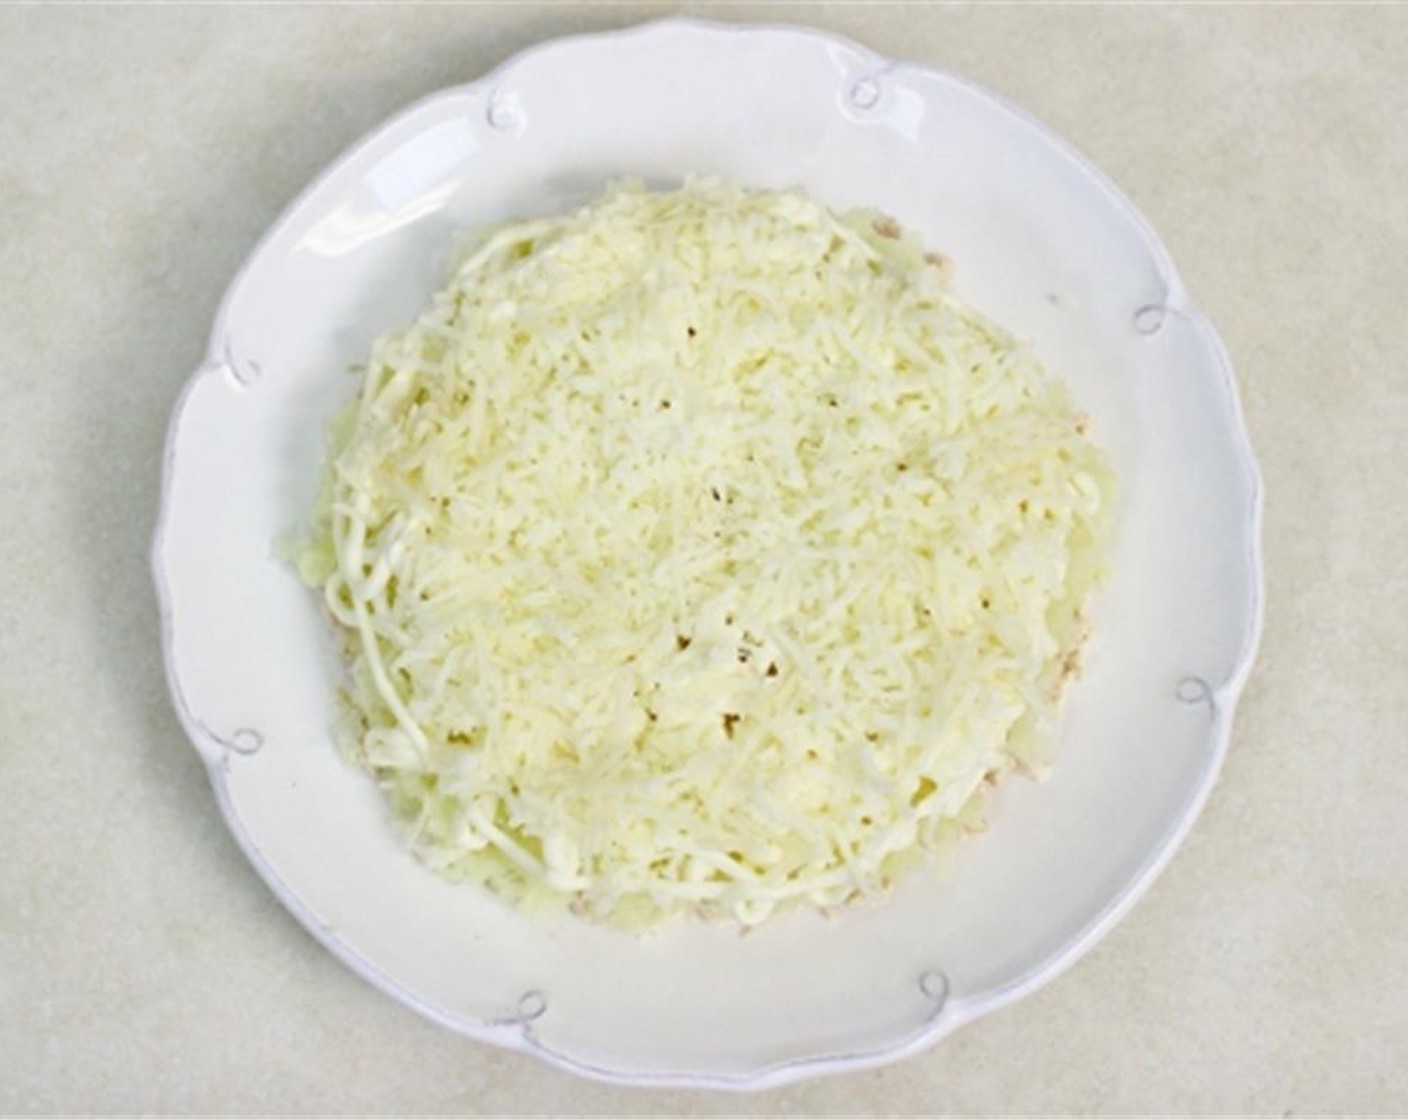 step 11 Spread the finely grated Mozzarella Cheese (1/2 cup) on top of the potatoes. You might need less than 1/4 cup of cheese on each salad, you need just enough to cover the potatoes in a thin layer.